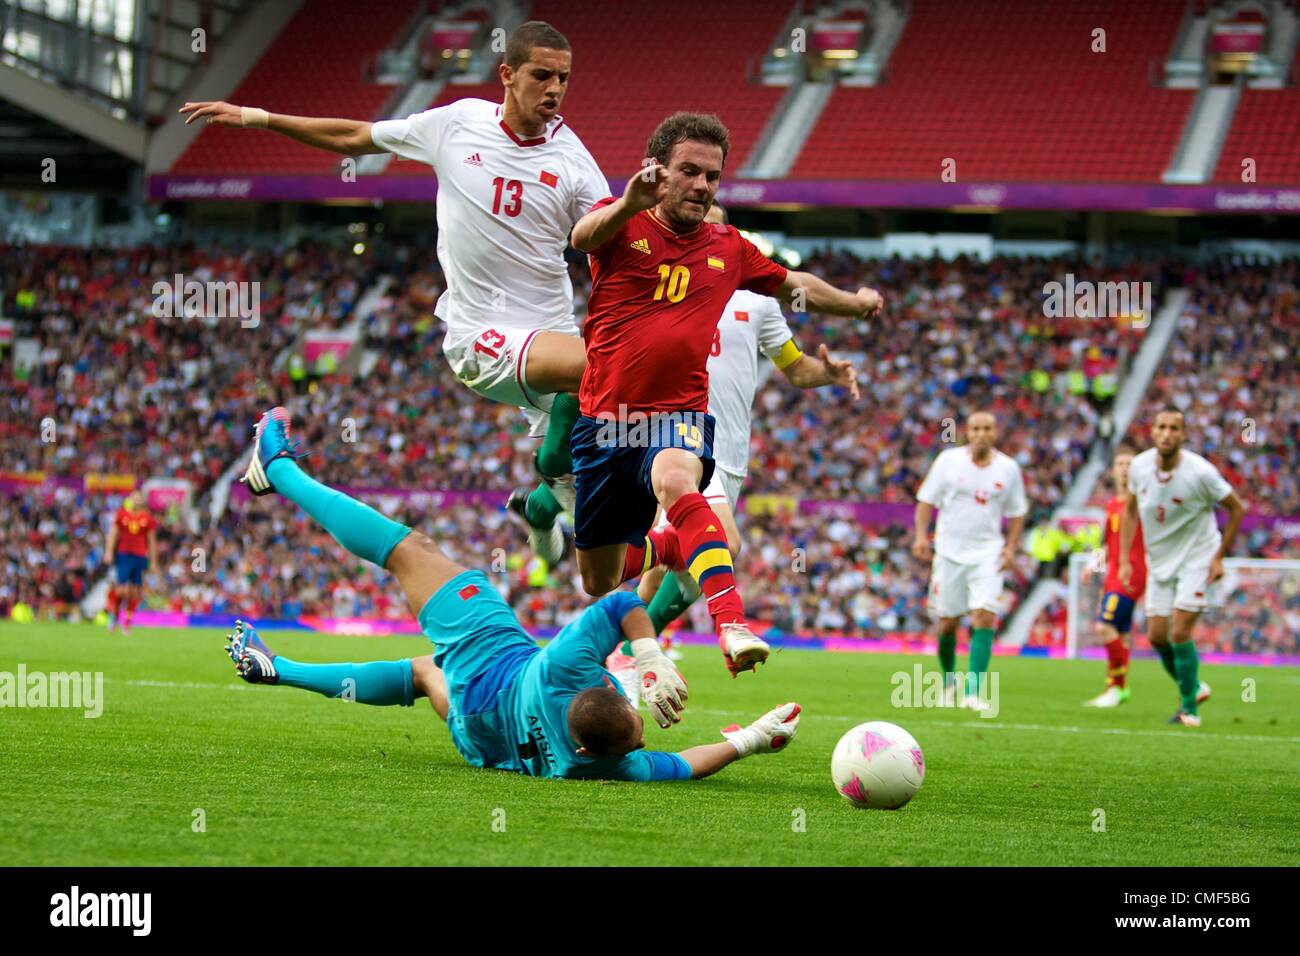 01.08.2012 Manchester, England. Spain midfielder Juan Mata, Morocco goalkeeper Mohamed Amsif and Morocco defender Zouhair Feddal in action during the third round group D mens match between Spain and Morocco at Old Trafford. Stock Photo